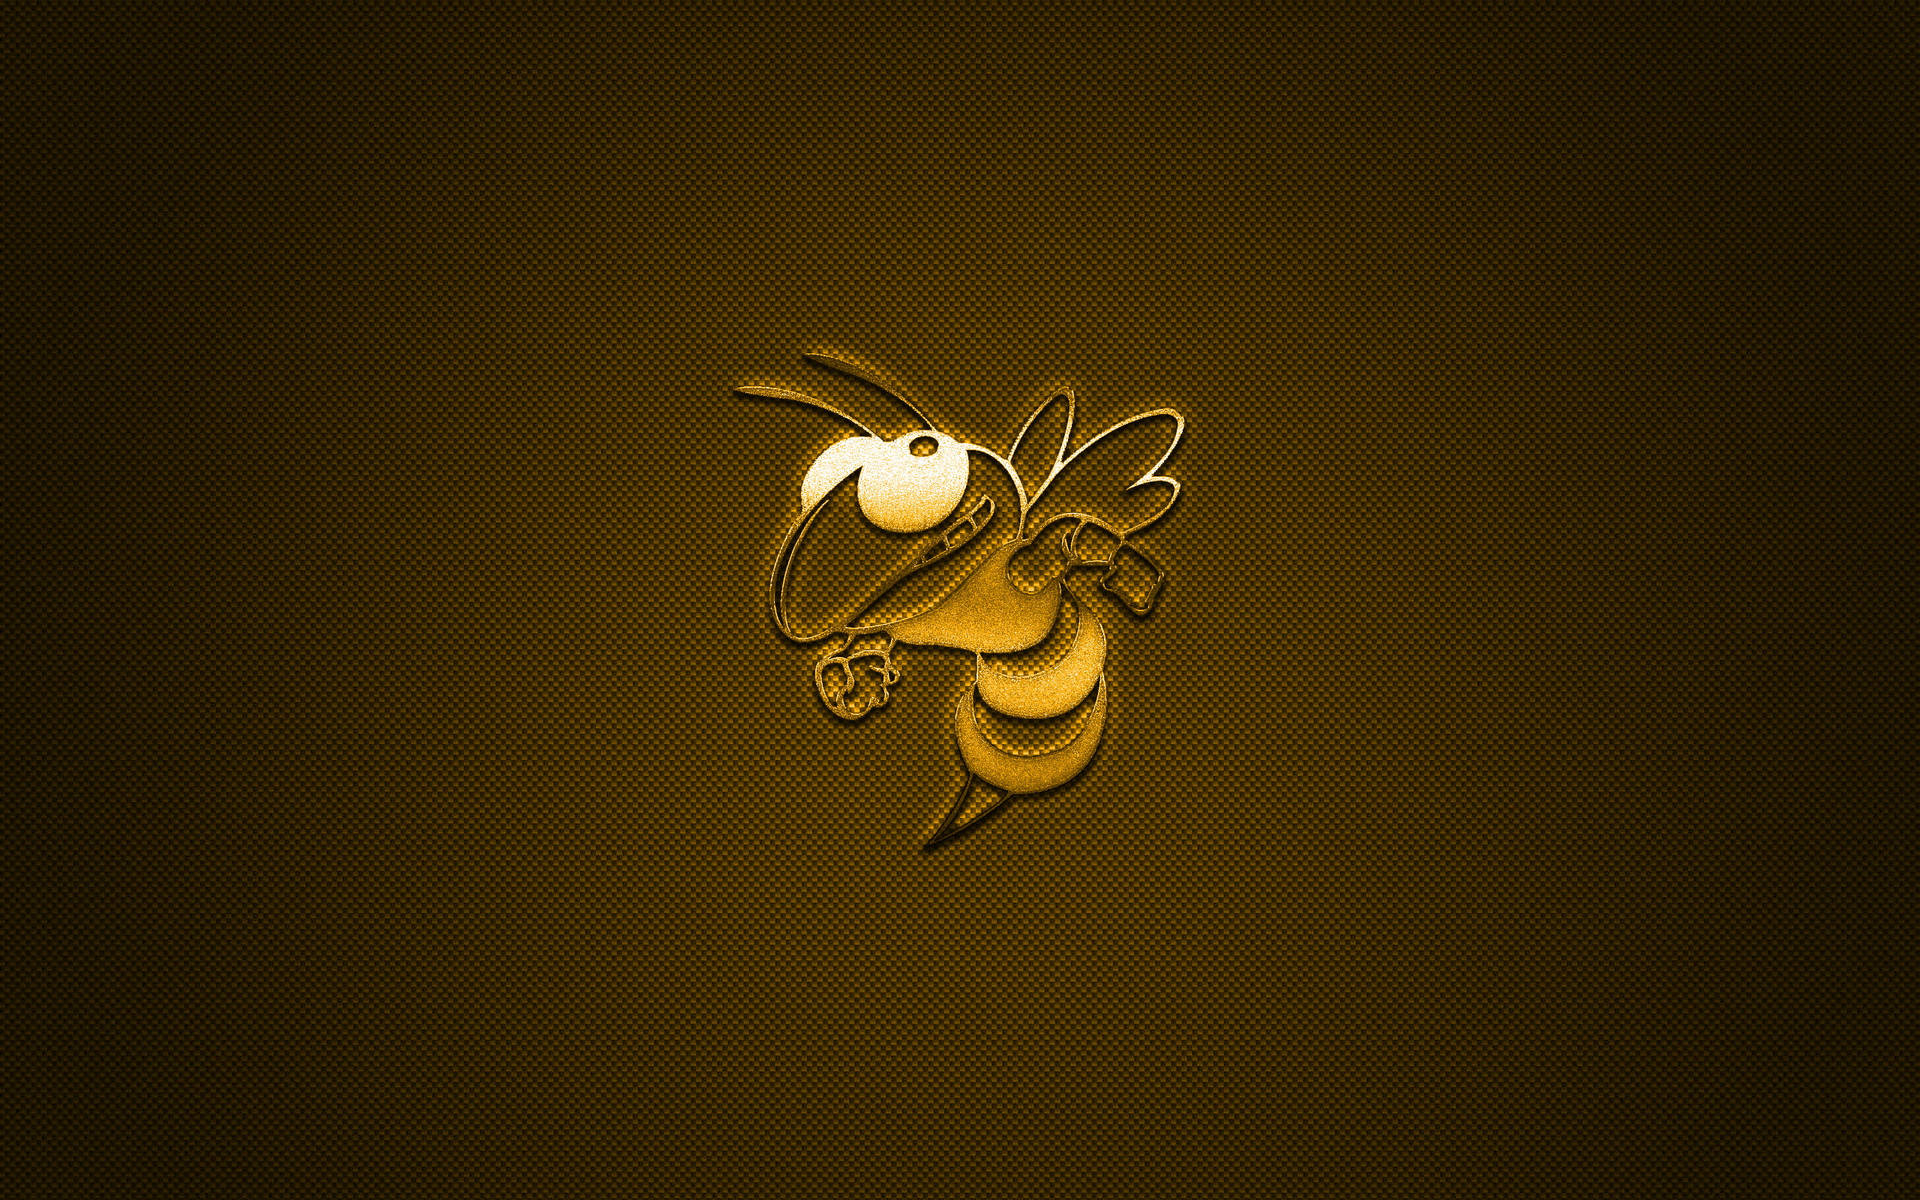 Georgia Tech Biet Motiv (more Commonly Used For Wallpaper) Wallpaper